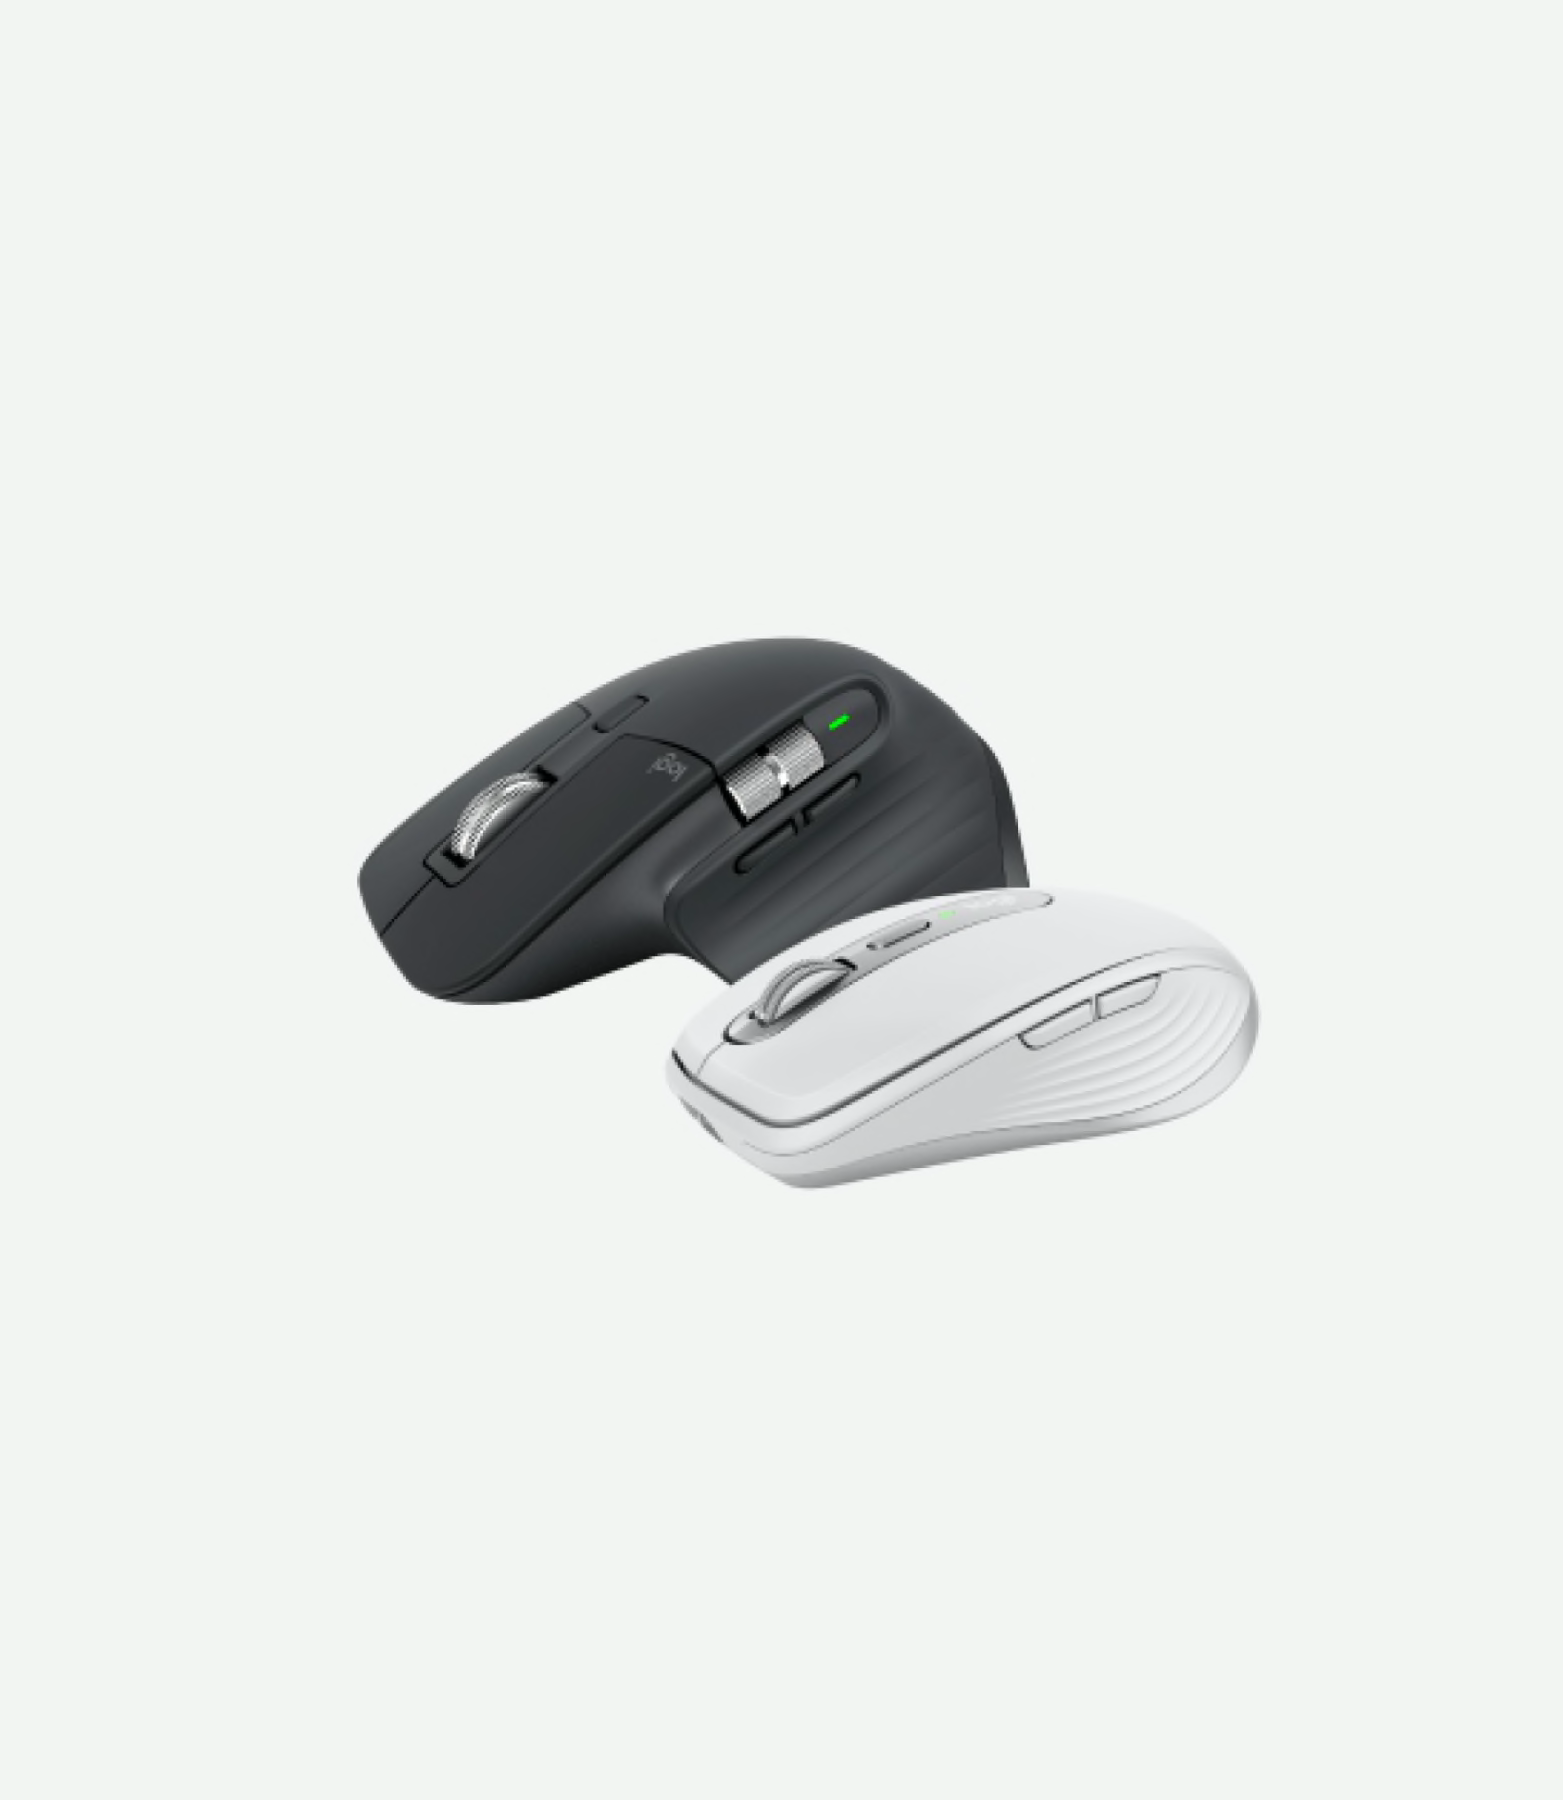 The MX Series by Logitech